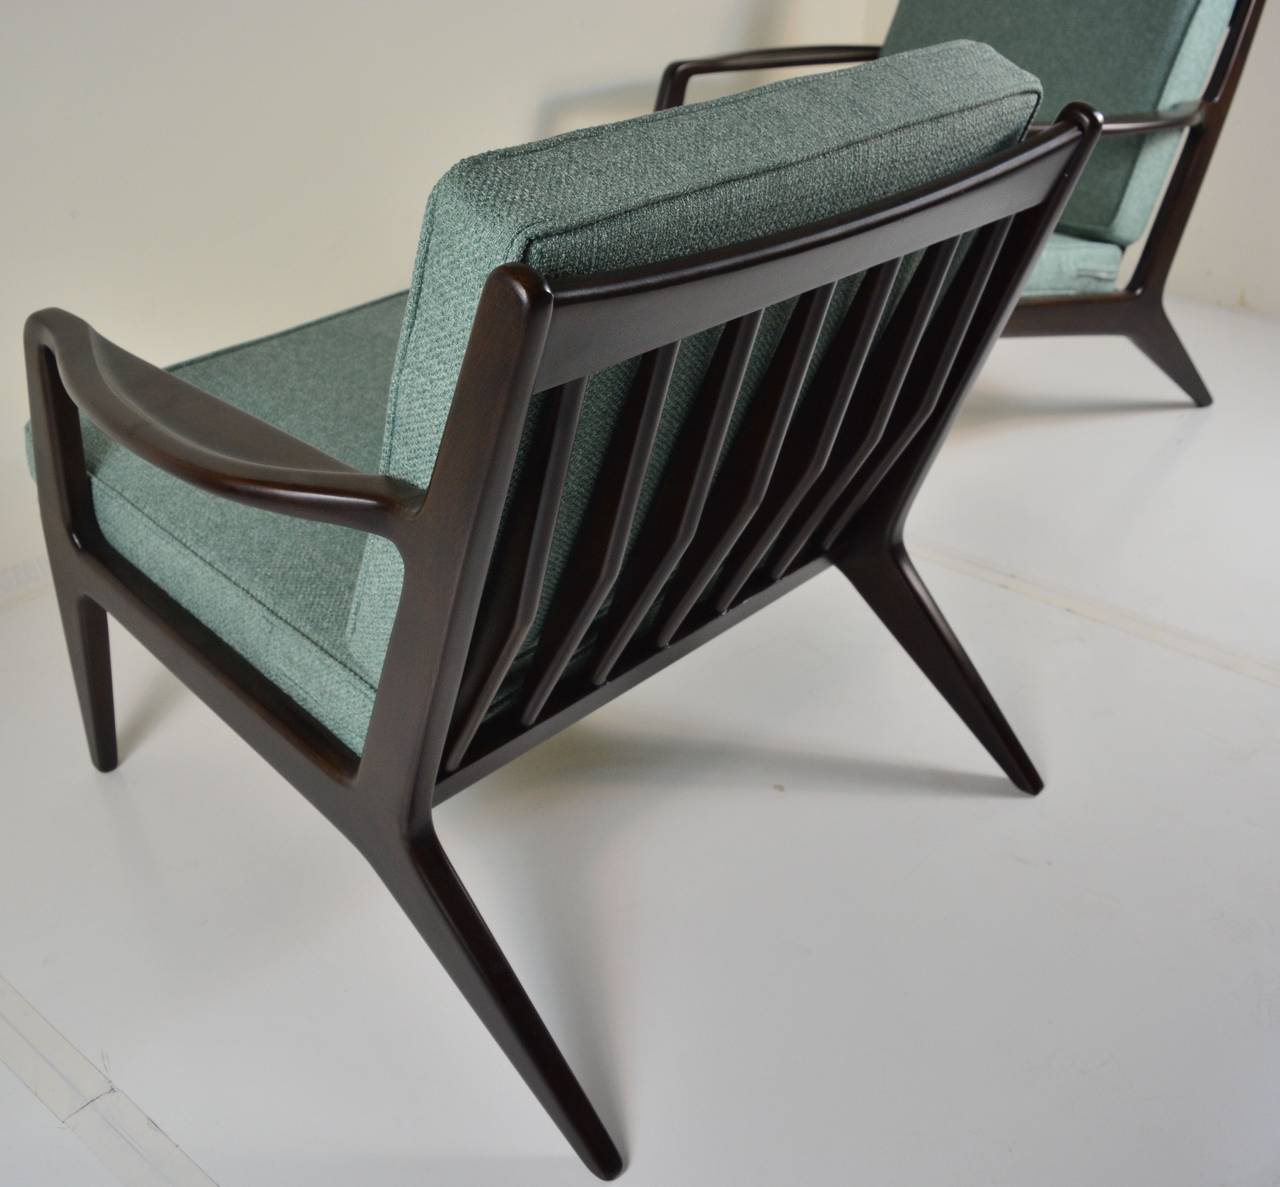 Pair of restored lounge chairs by Ib Kofod-Larsen for Selig in dark walnut hue with period style textured fabric.